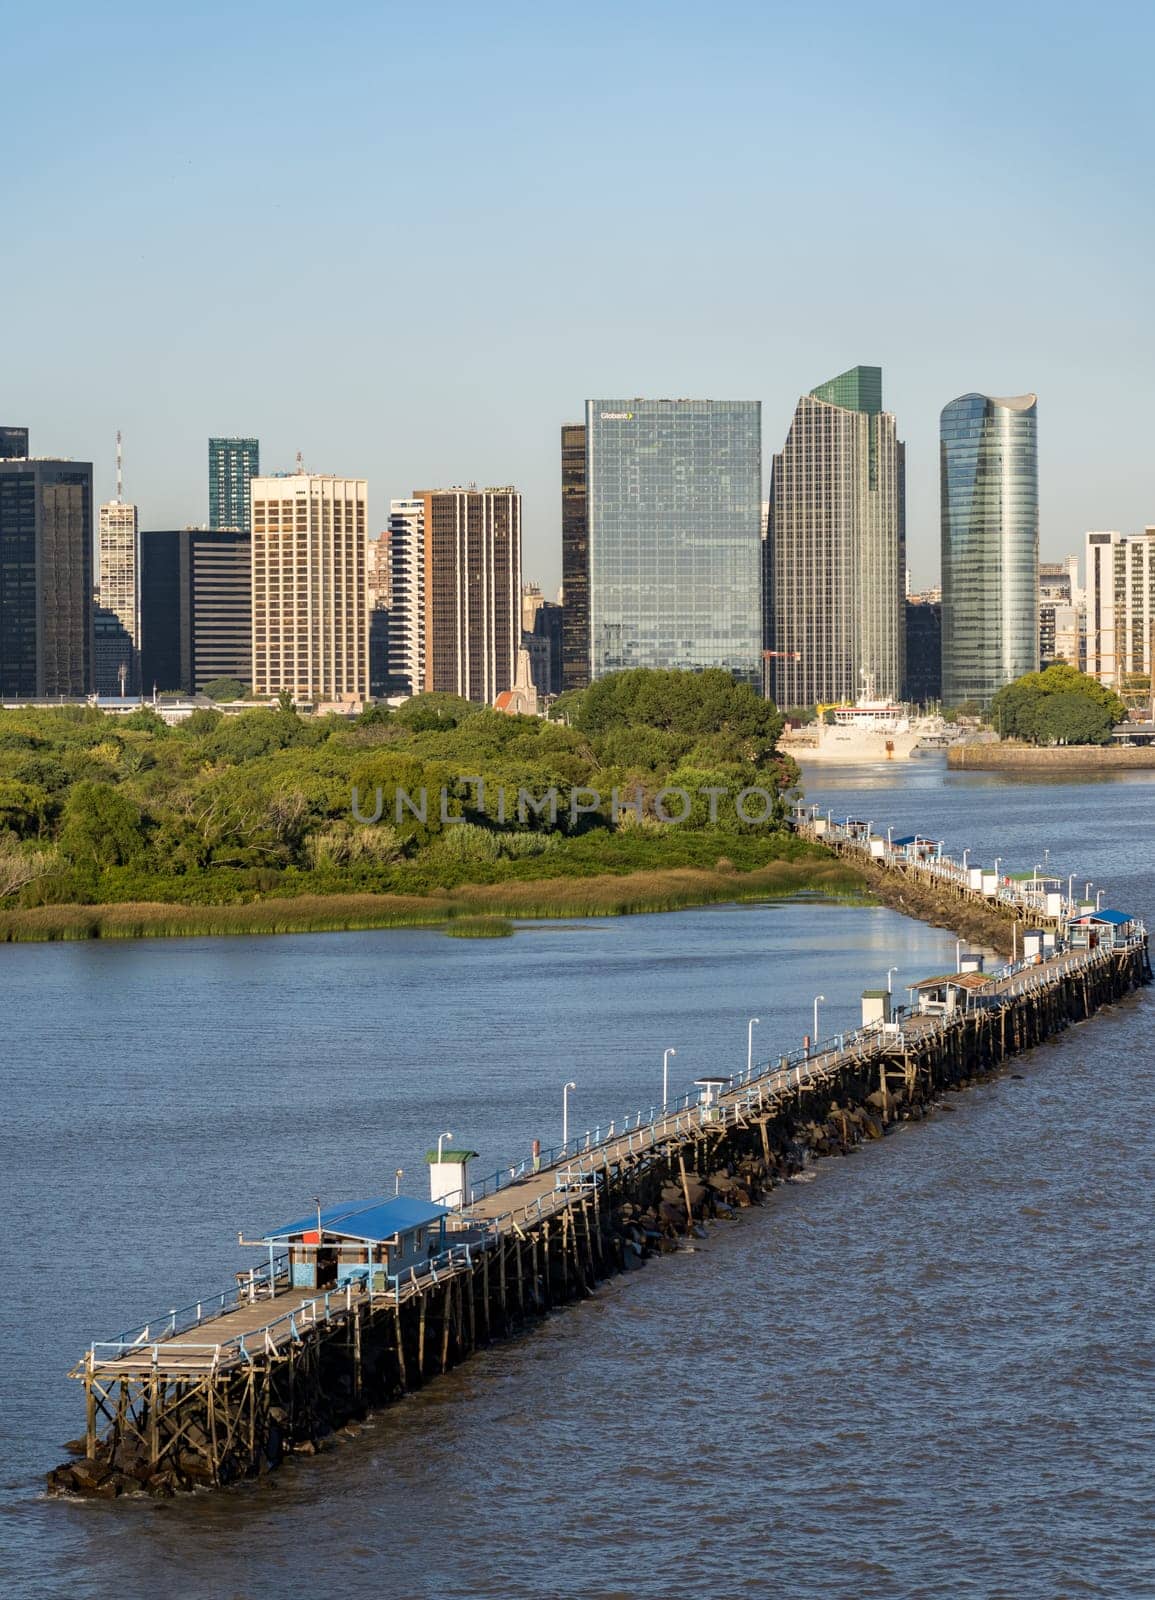 Buenos Aires, Argentina - 6 February 2023: Downtown city skyline with pier at the entrance to the port